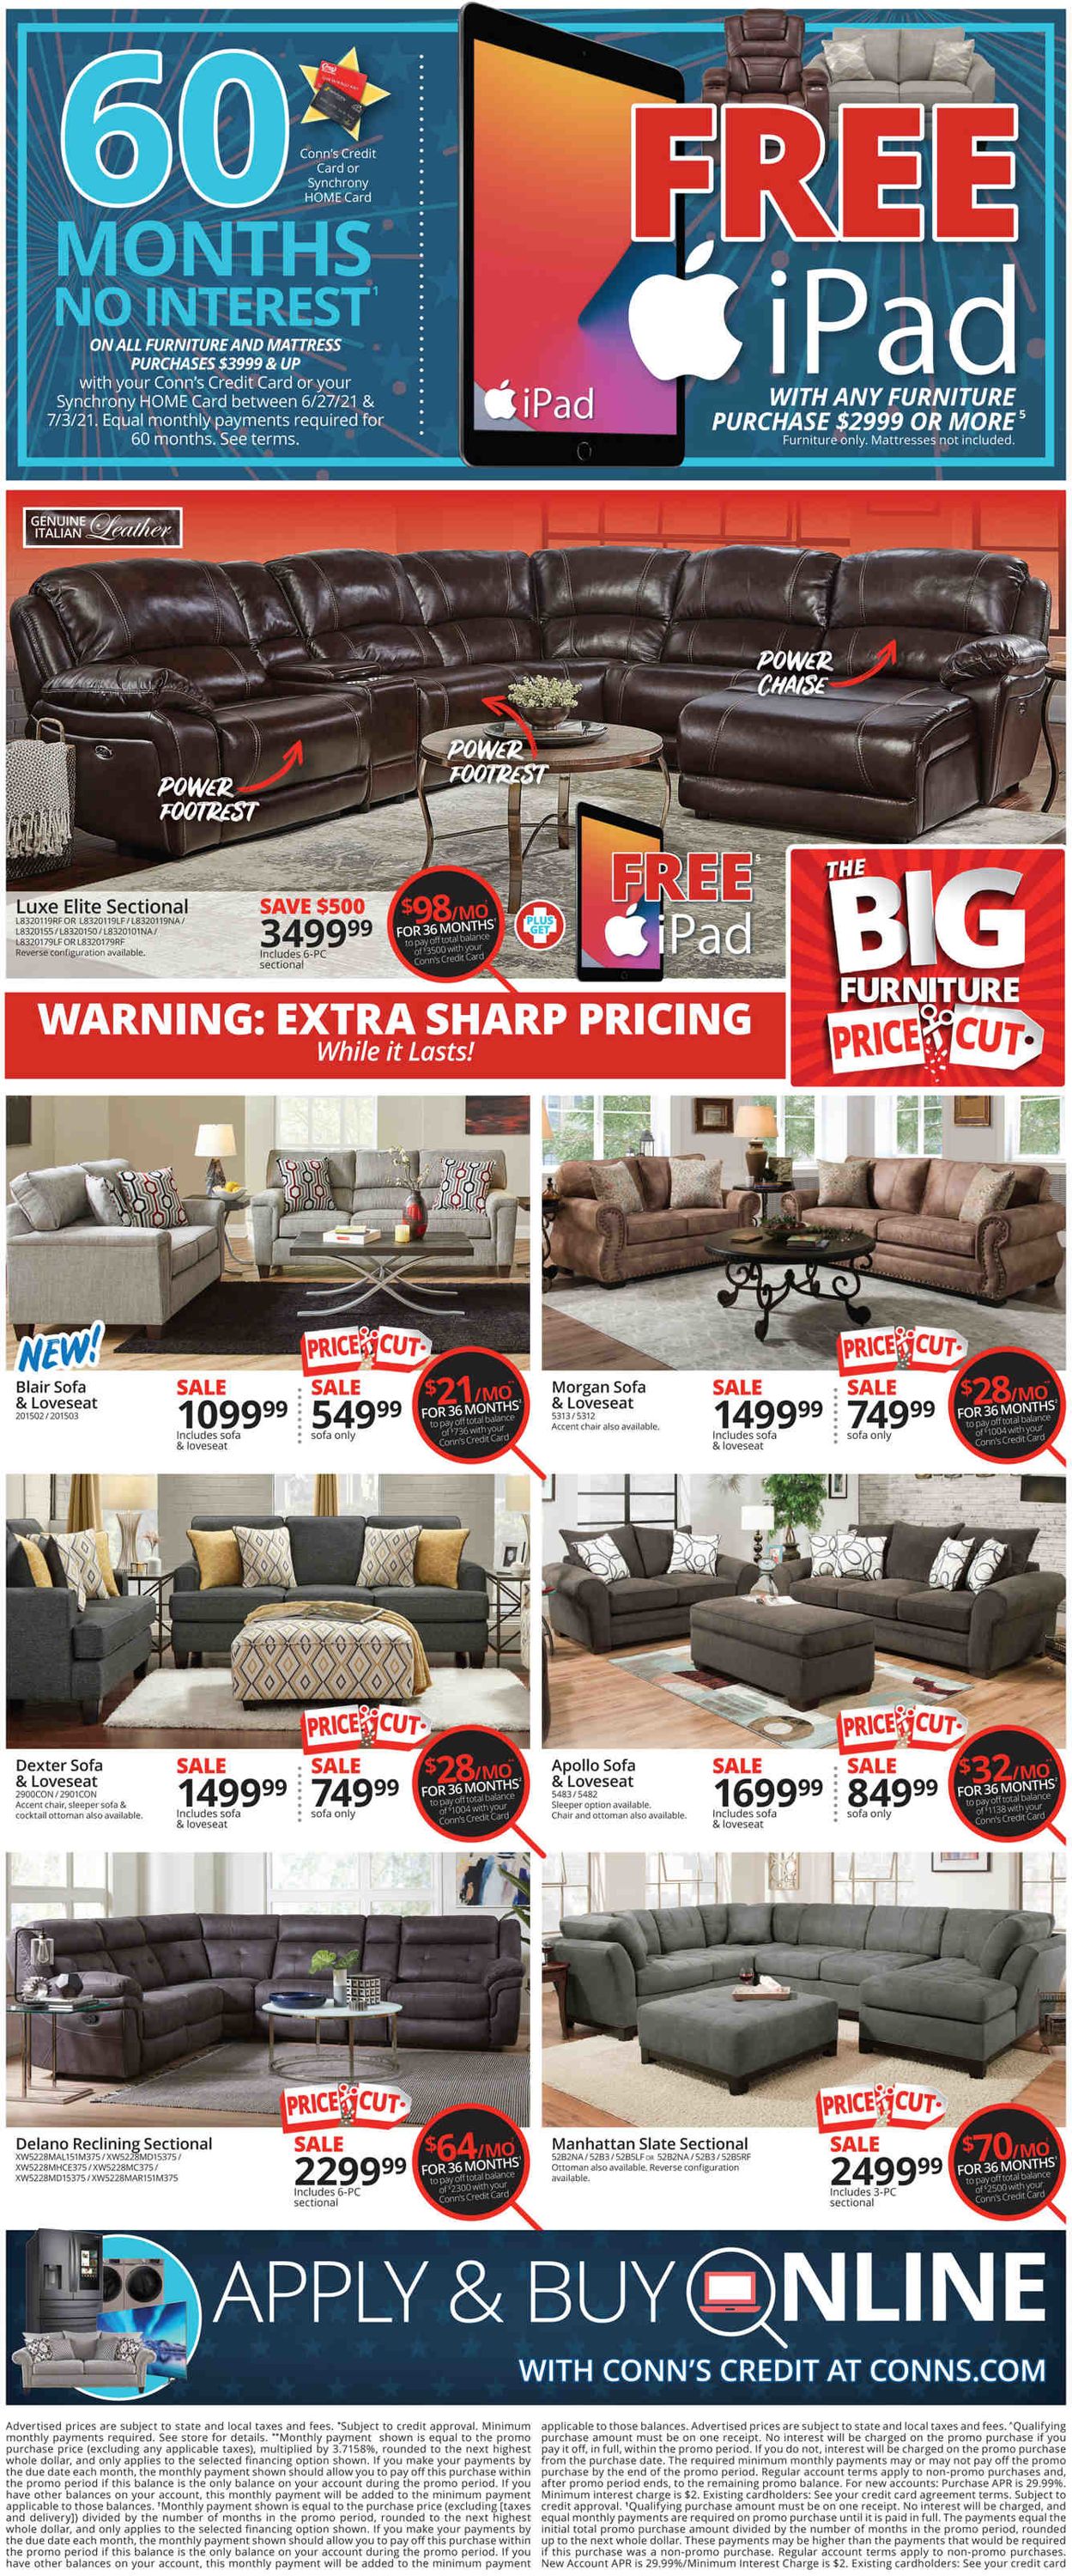 Conn's Home Plus Weekly Ad Circular - valid 06/27-07/03/2021 (Page 2)